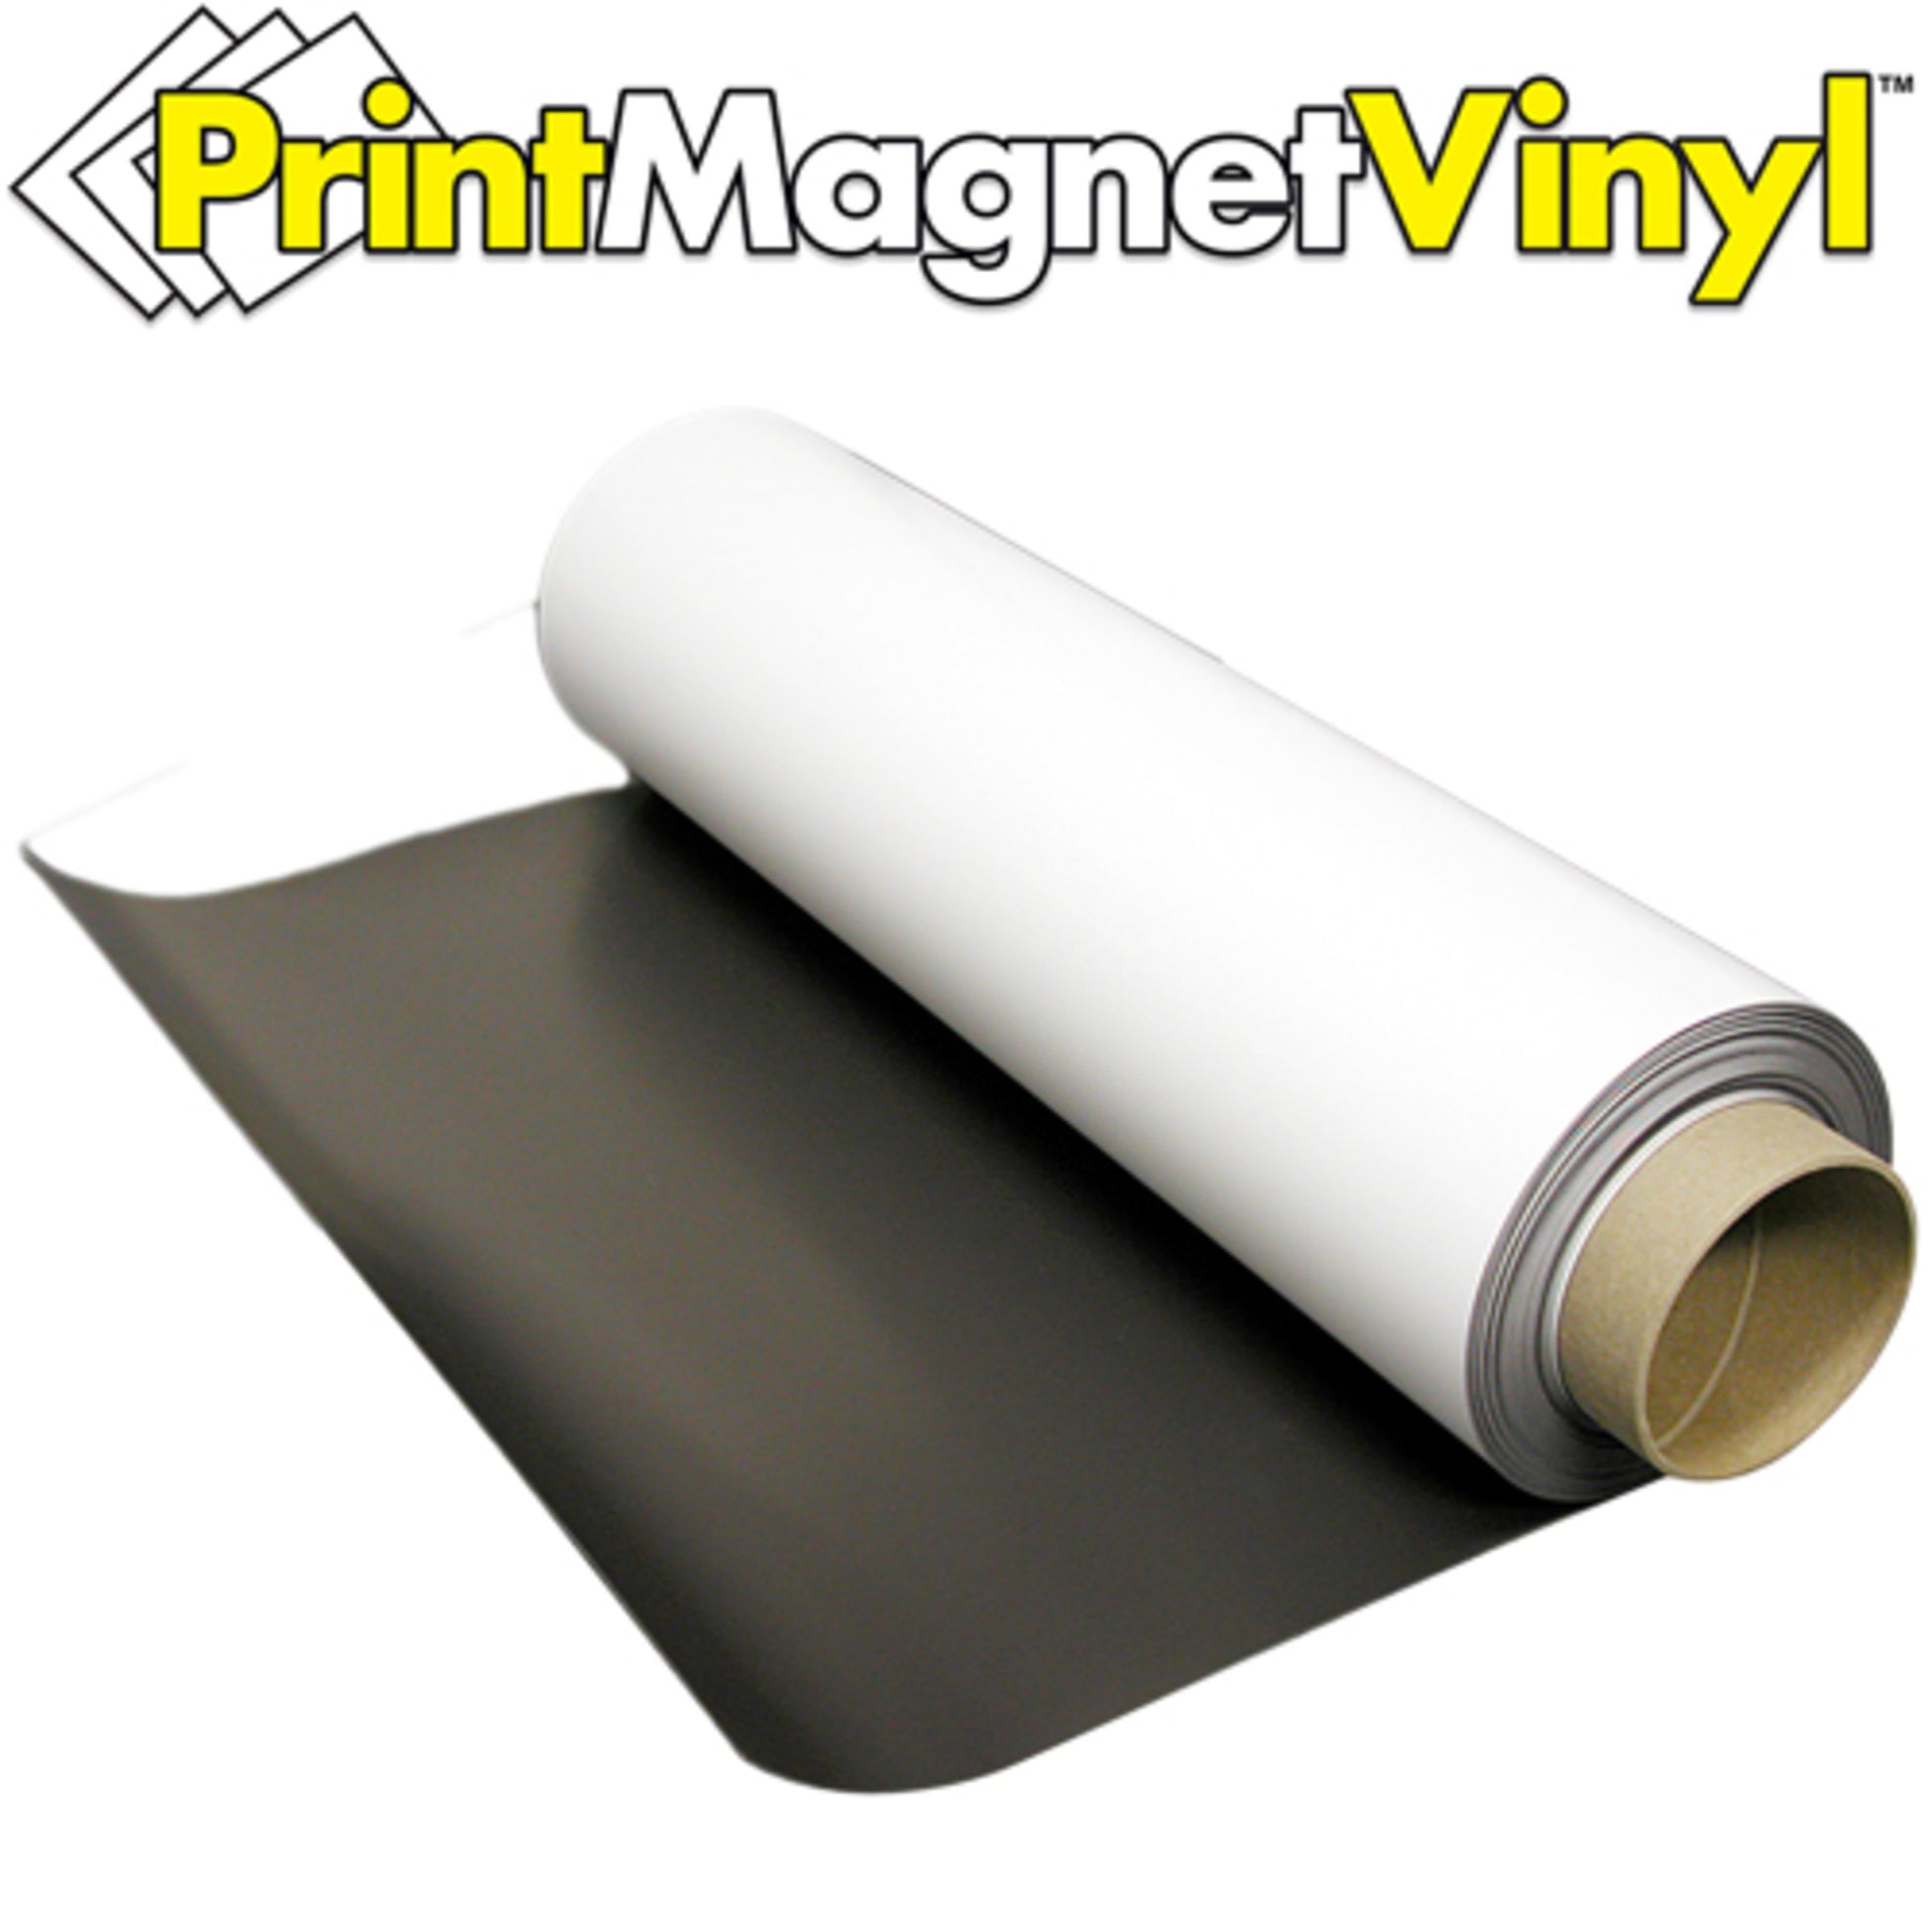 Load image into Gallery viewer, ZGN2040GW50 PrintMagnetVinyl™ Flexible Magnetic Sheet - In Use